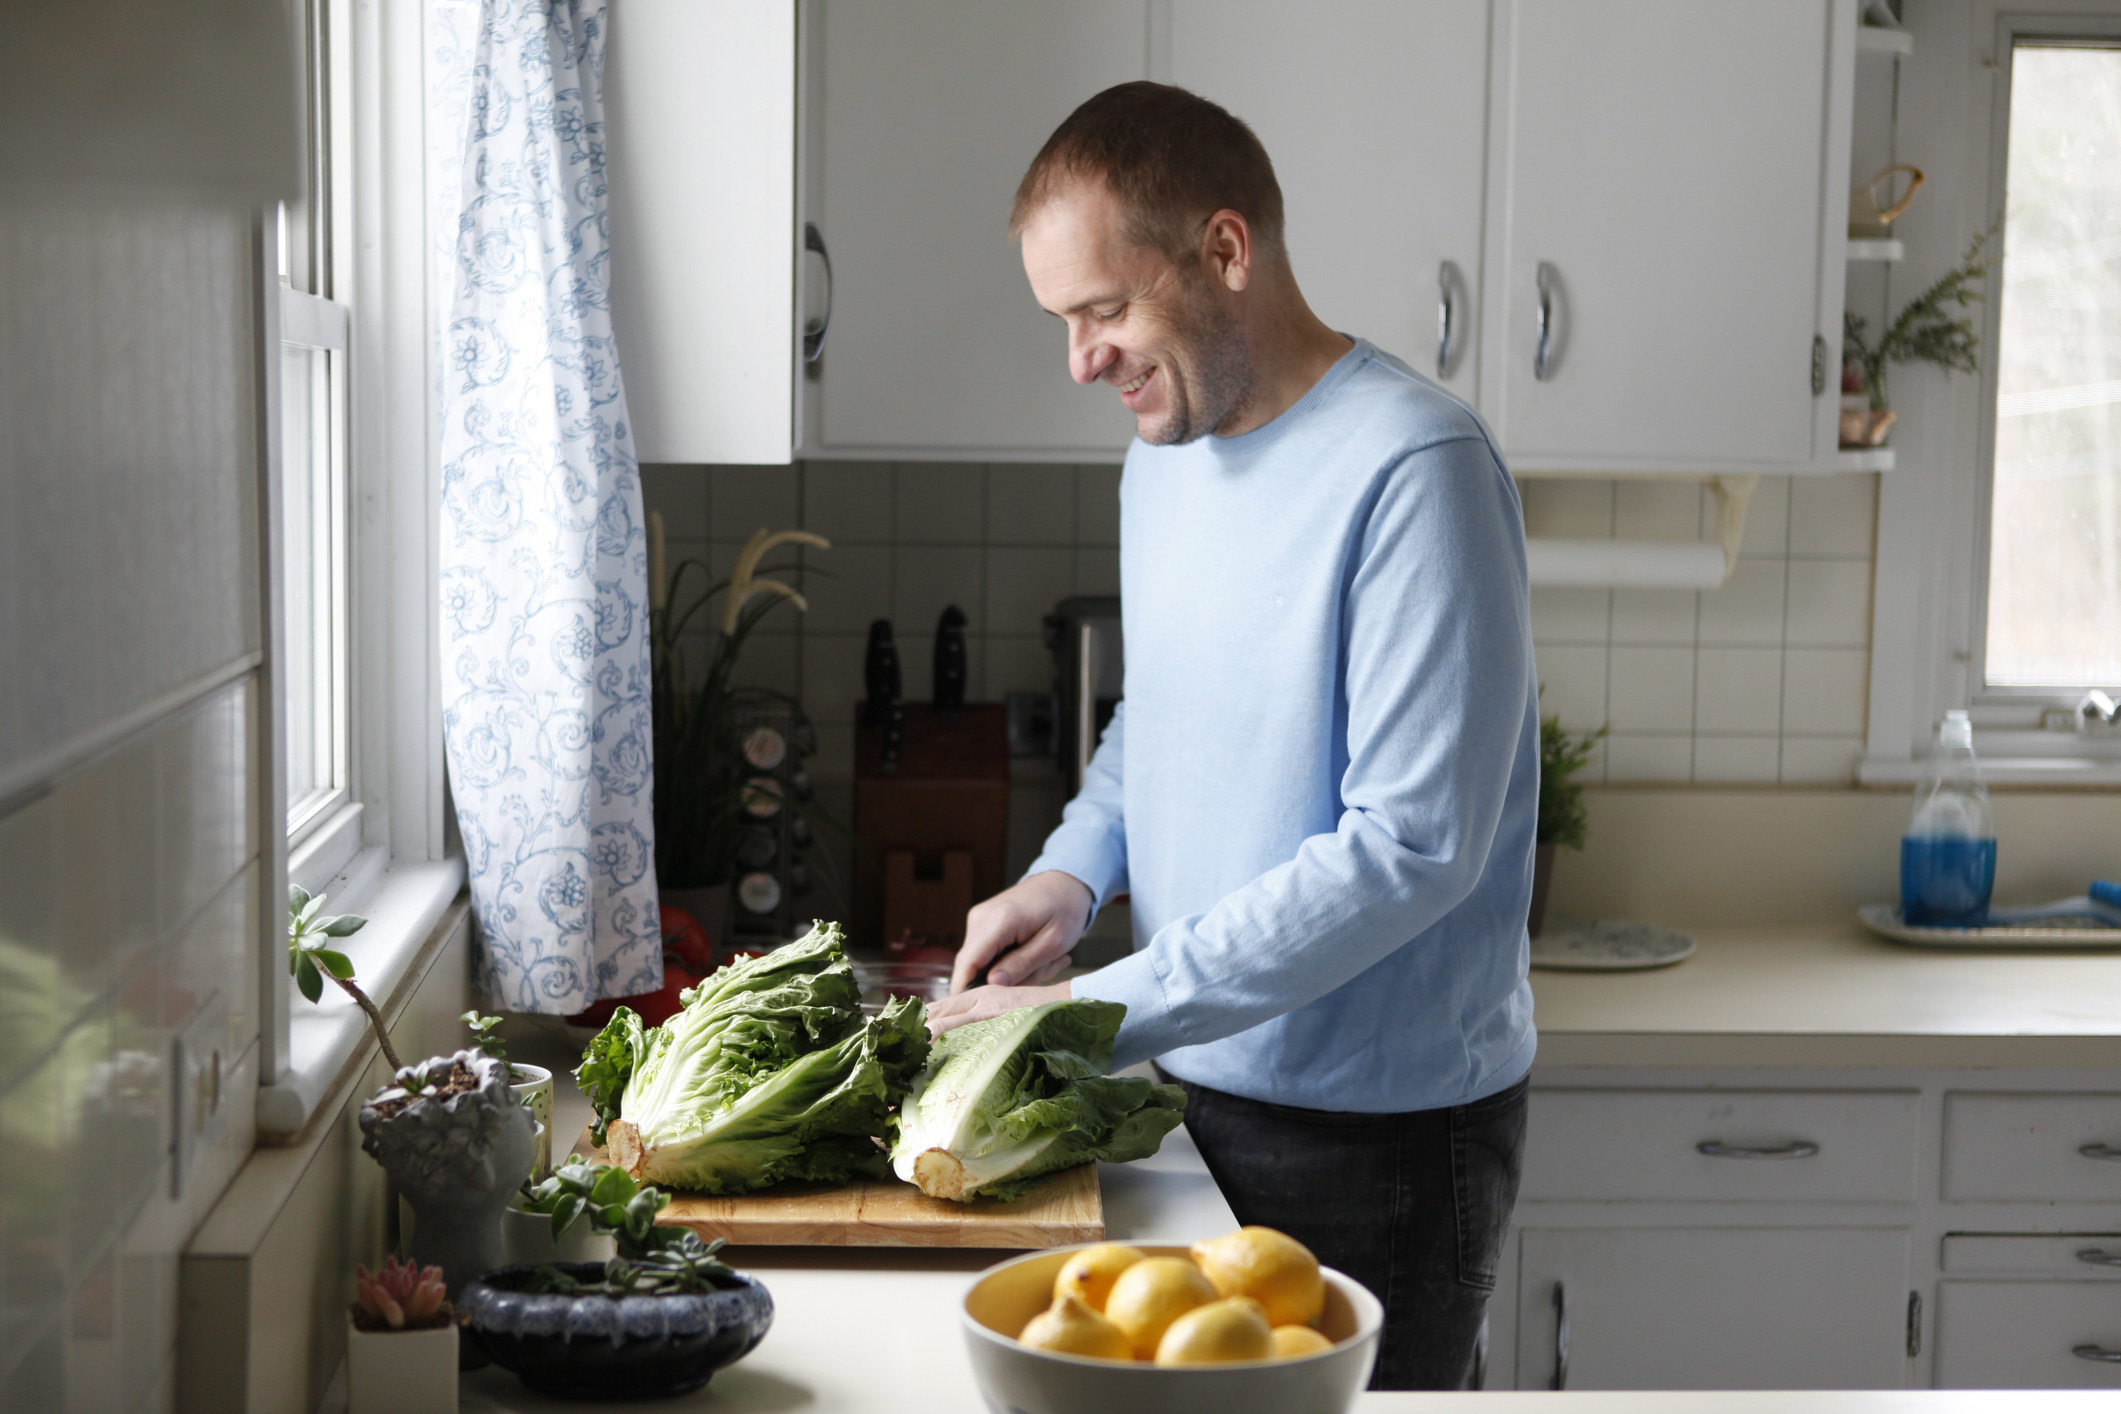 A man cutting vegetables in his kitchen